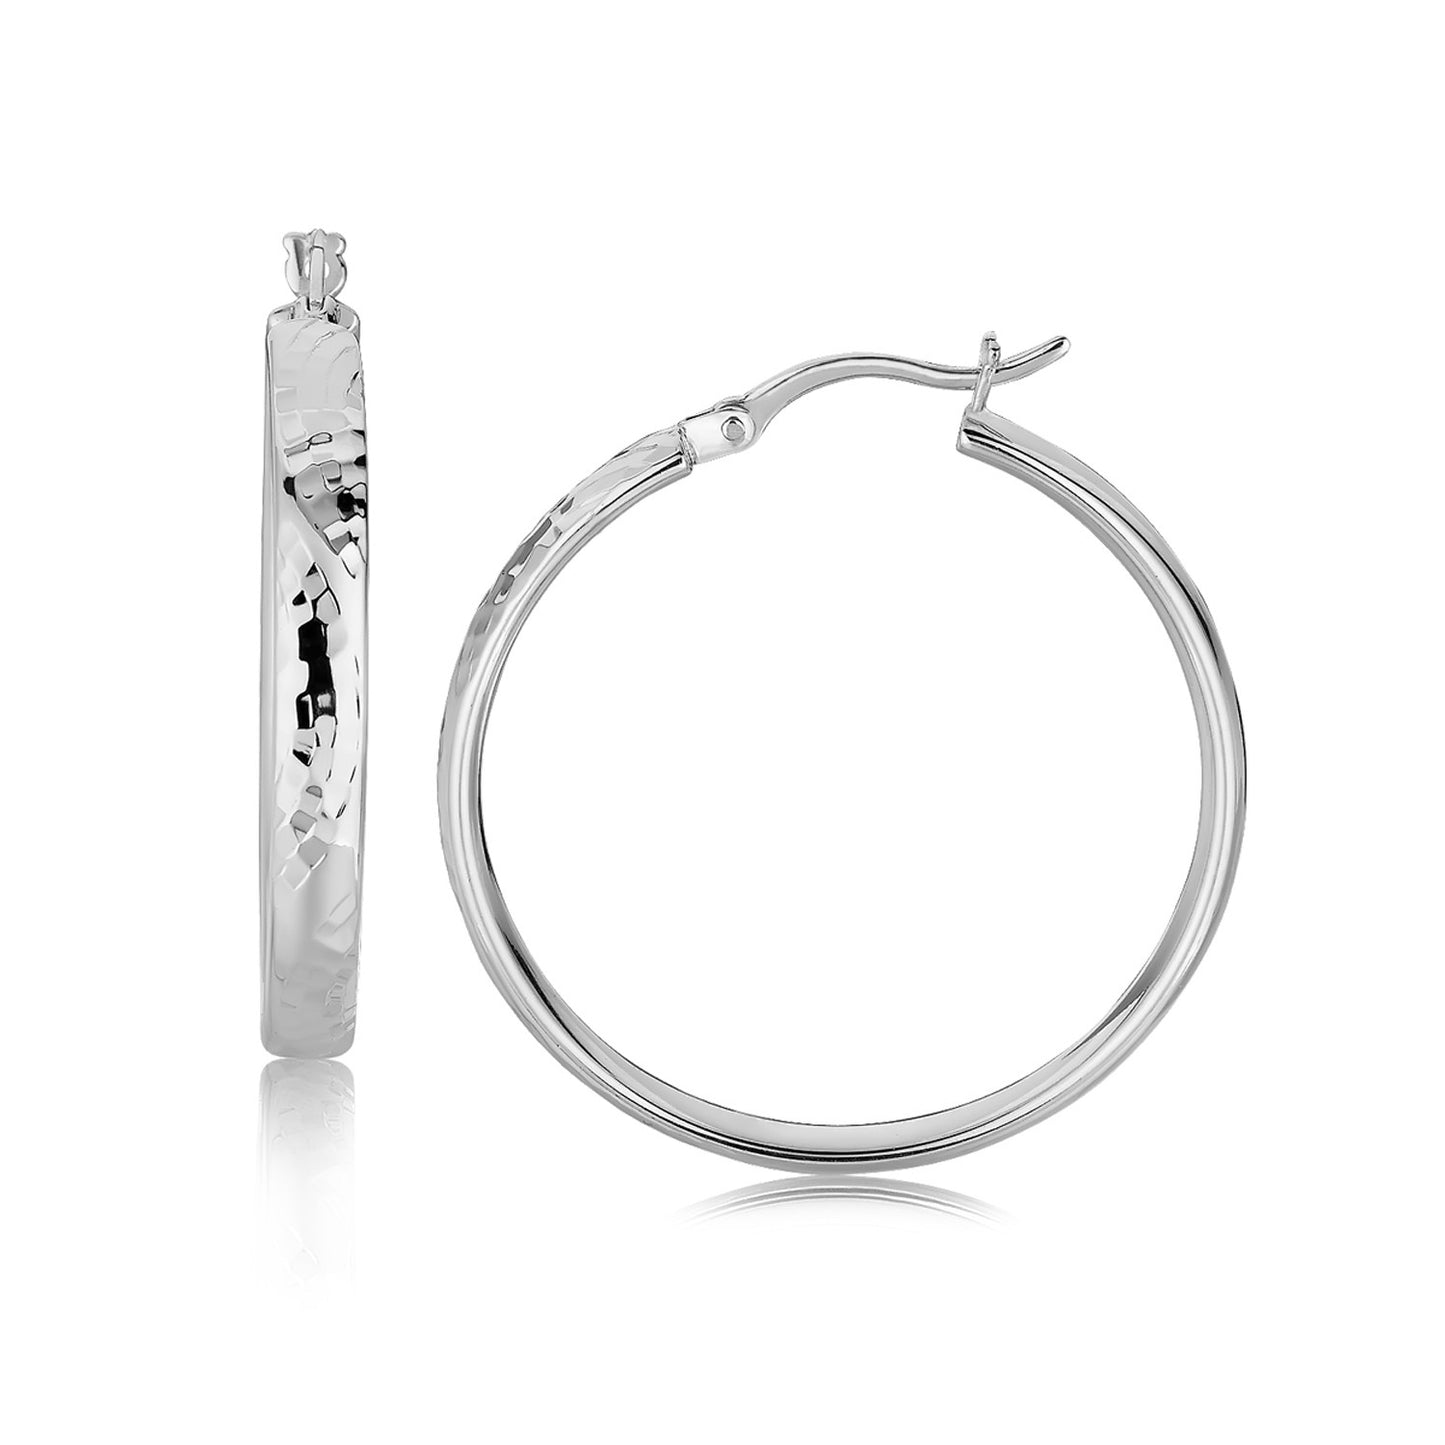 Sterling Silver Hammered Style Hoop Earrings with Rhodium Plating (4x30mm)